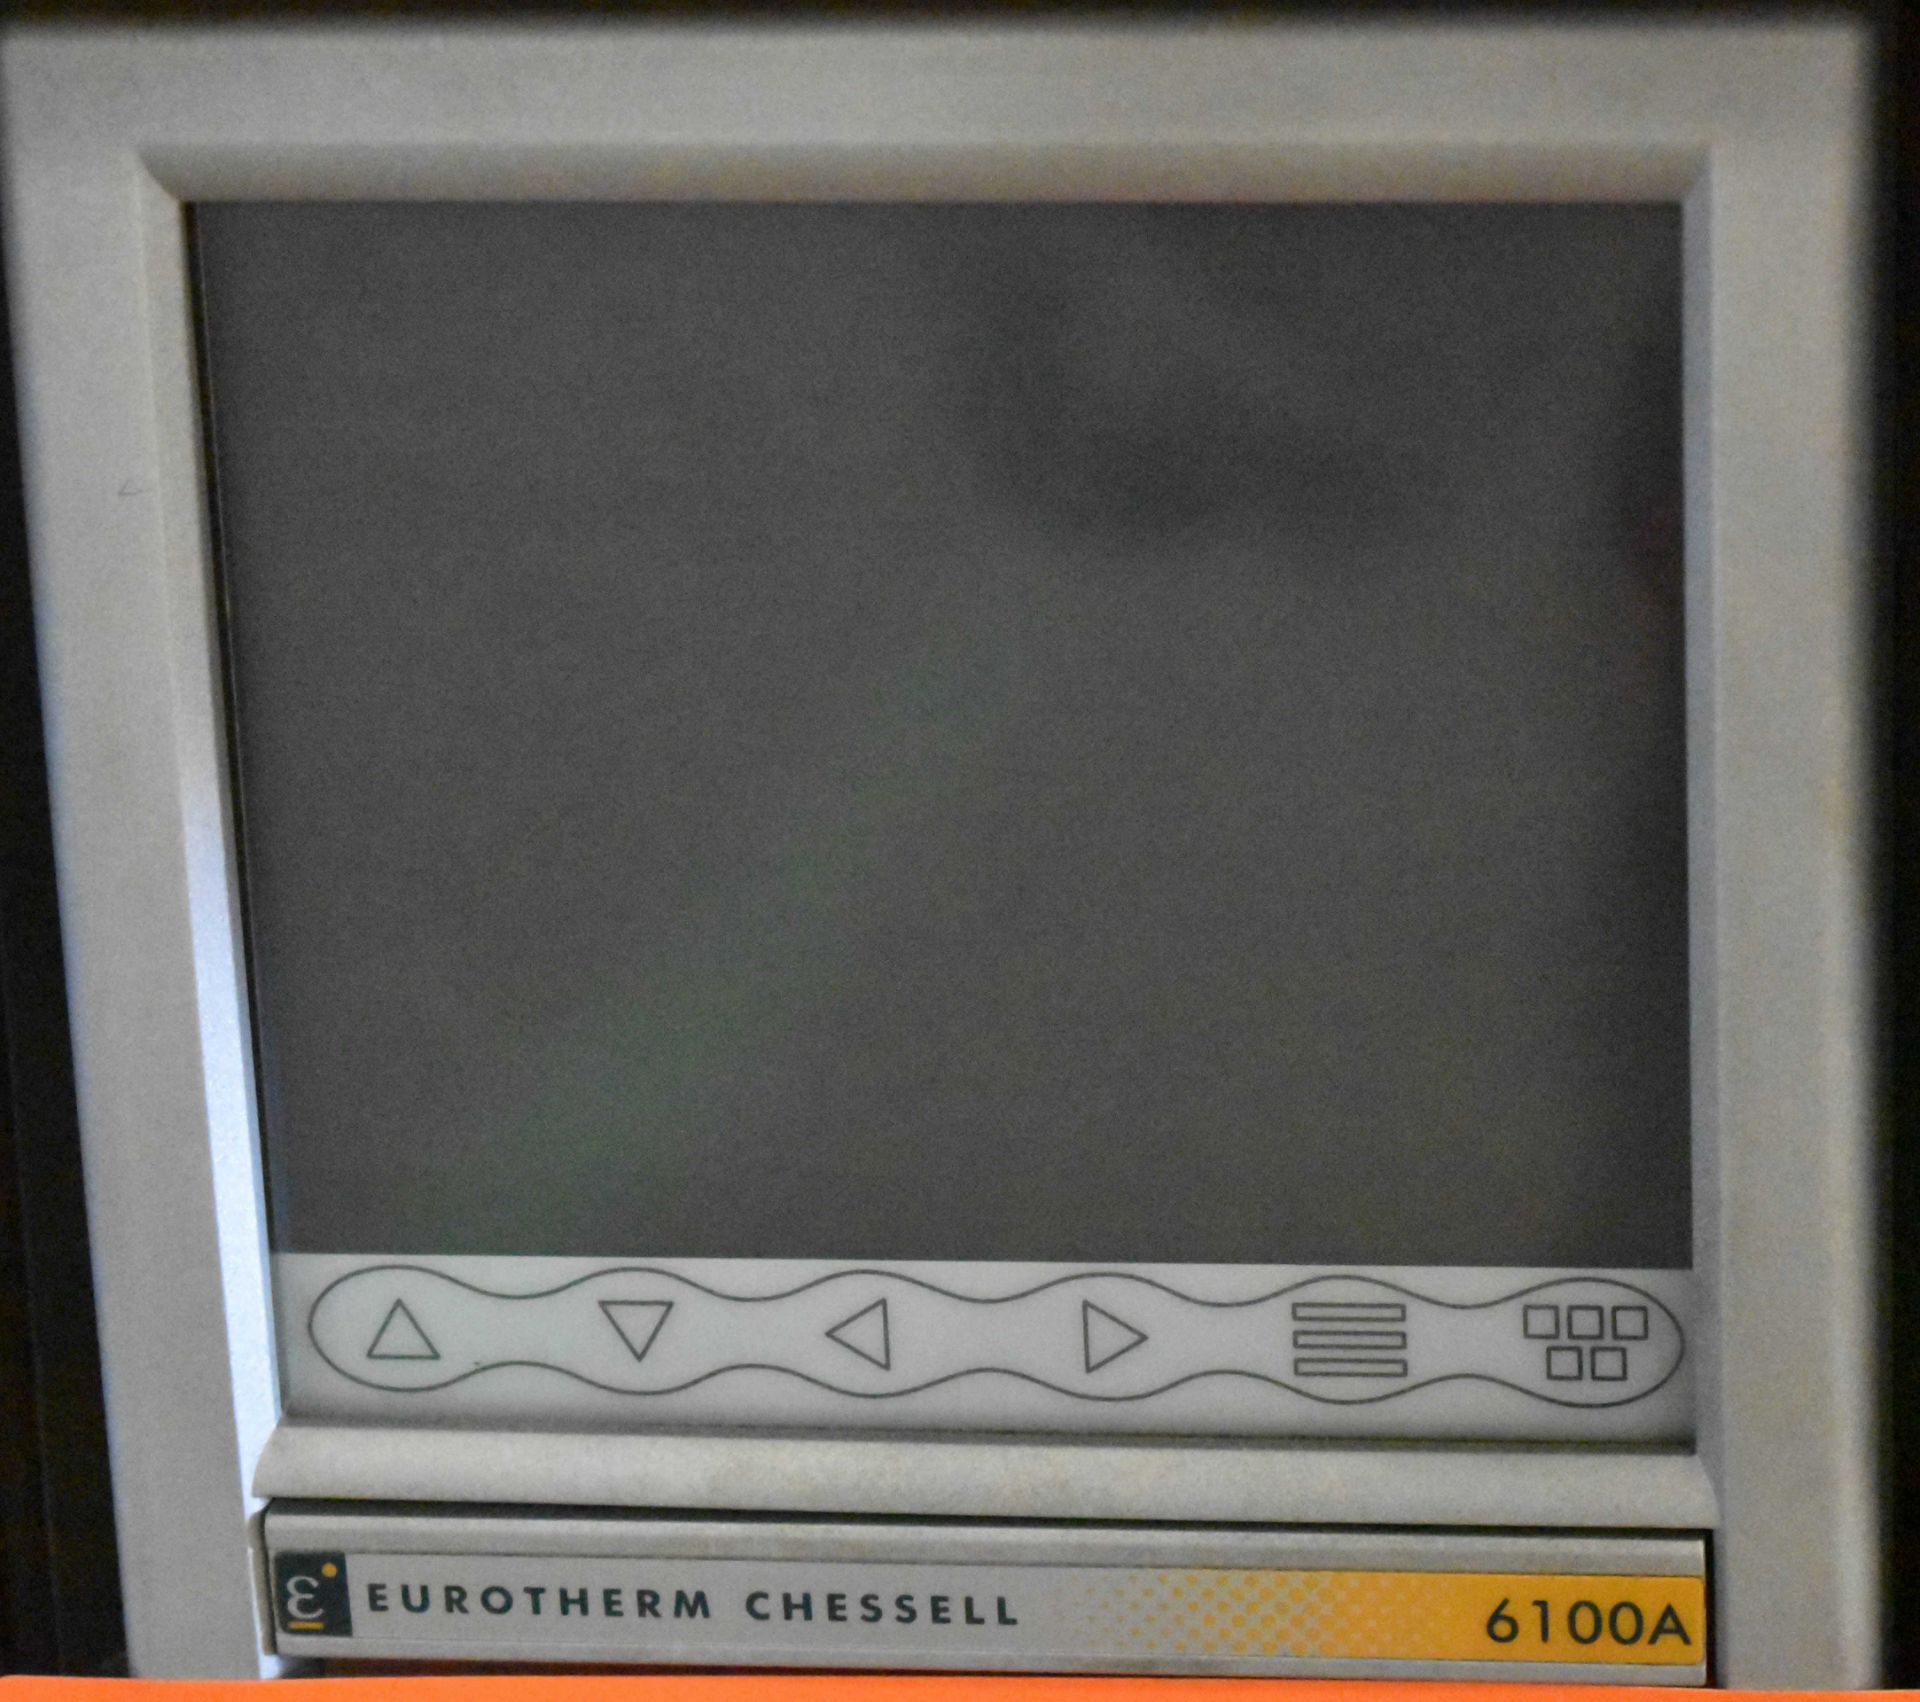 EUROTHERM CHESSELL 6100A PAPERLESS DATA RECORDER WITH 5.5" FULL COLOUR TOUCHSCREEN DISPLAY, S/N: - Image 2 of 4